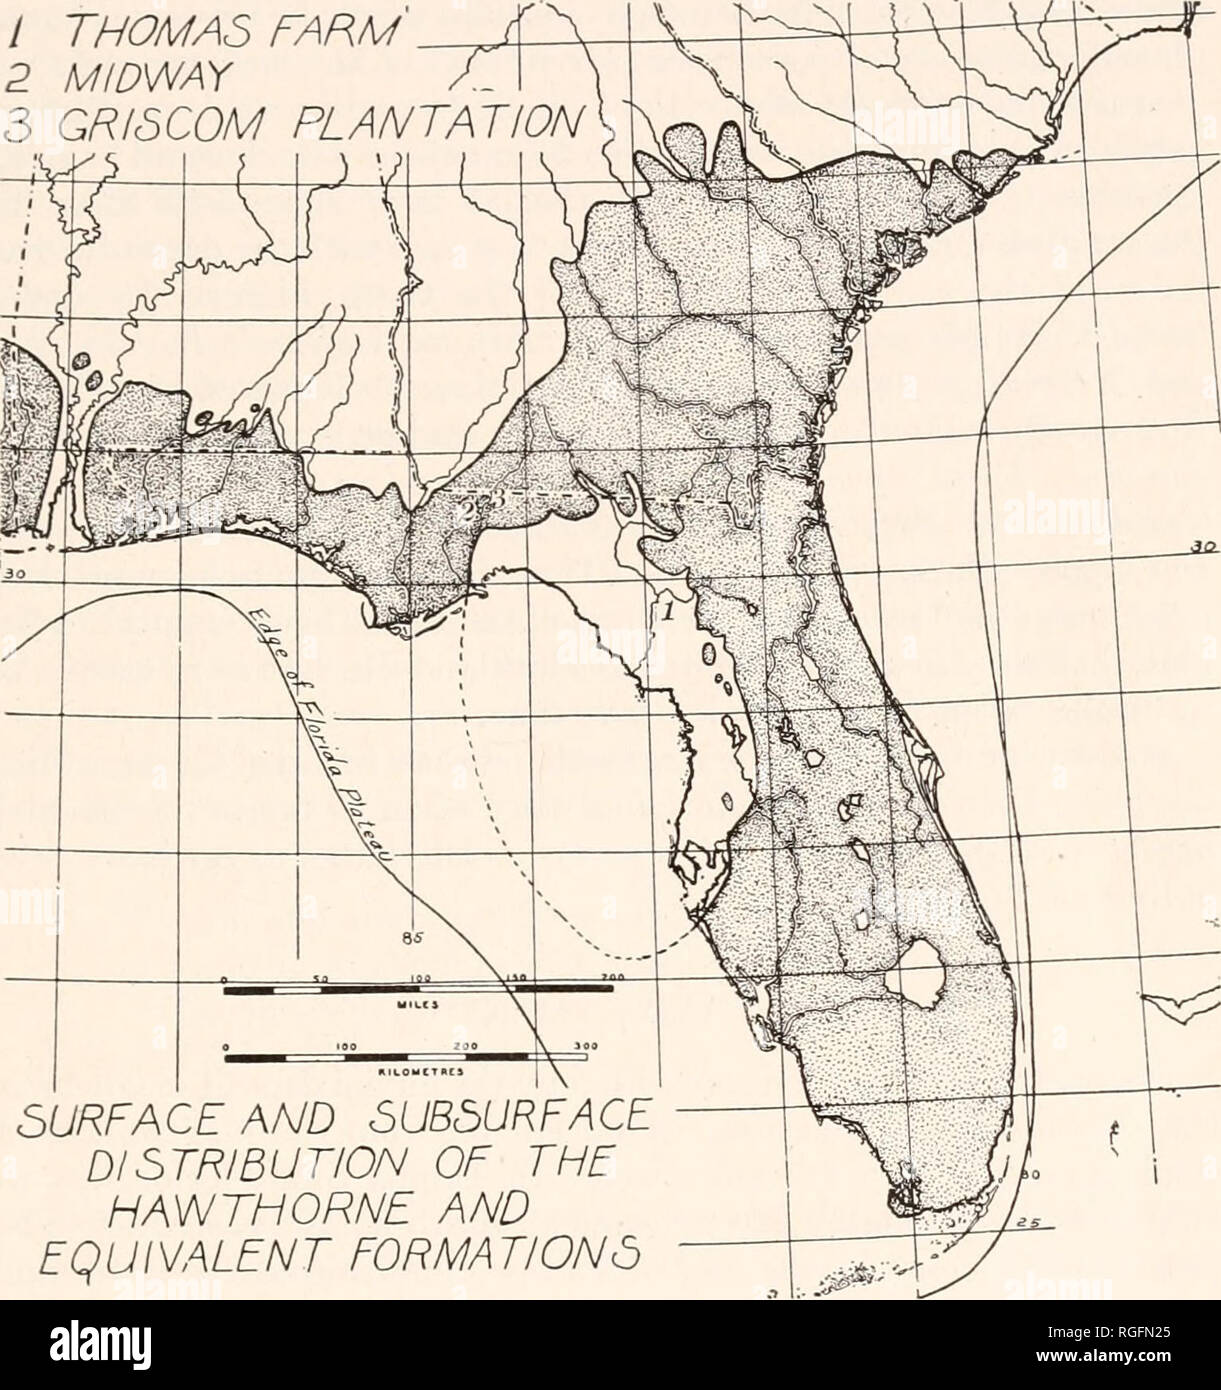 . Bulletin of the Museum of Comparative Zoology at Harvard College. Zoology. white: LOWER MIOCENE MAMMAL FAUNA OF FLORIDA 41 At Alum Bluff, 4j/£ miles north of Blountstown, Liberty Co., Florida Cooke and Mossom (1928, p. 108) record an unconformity between the Chipola formation and the overlying, plant-bearing beds whose age is / THOMAS FARM 2 MIDWAY 3 GRISCOM PLANTATION. SURFACE AND SUB5URFACE DISTRIBUTION OF THE HAWTHORNE AND EQUIVALENT FORMATIONS Fig. 9. Distribution of Hawthorne and equivalent formations. still in doubt. This locality is so close to the north boundary of the Oke- fenokee T Stock Photo